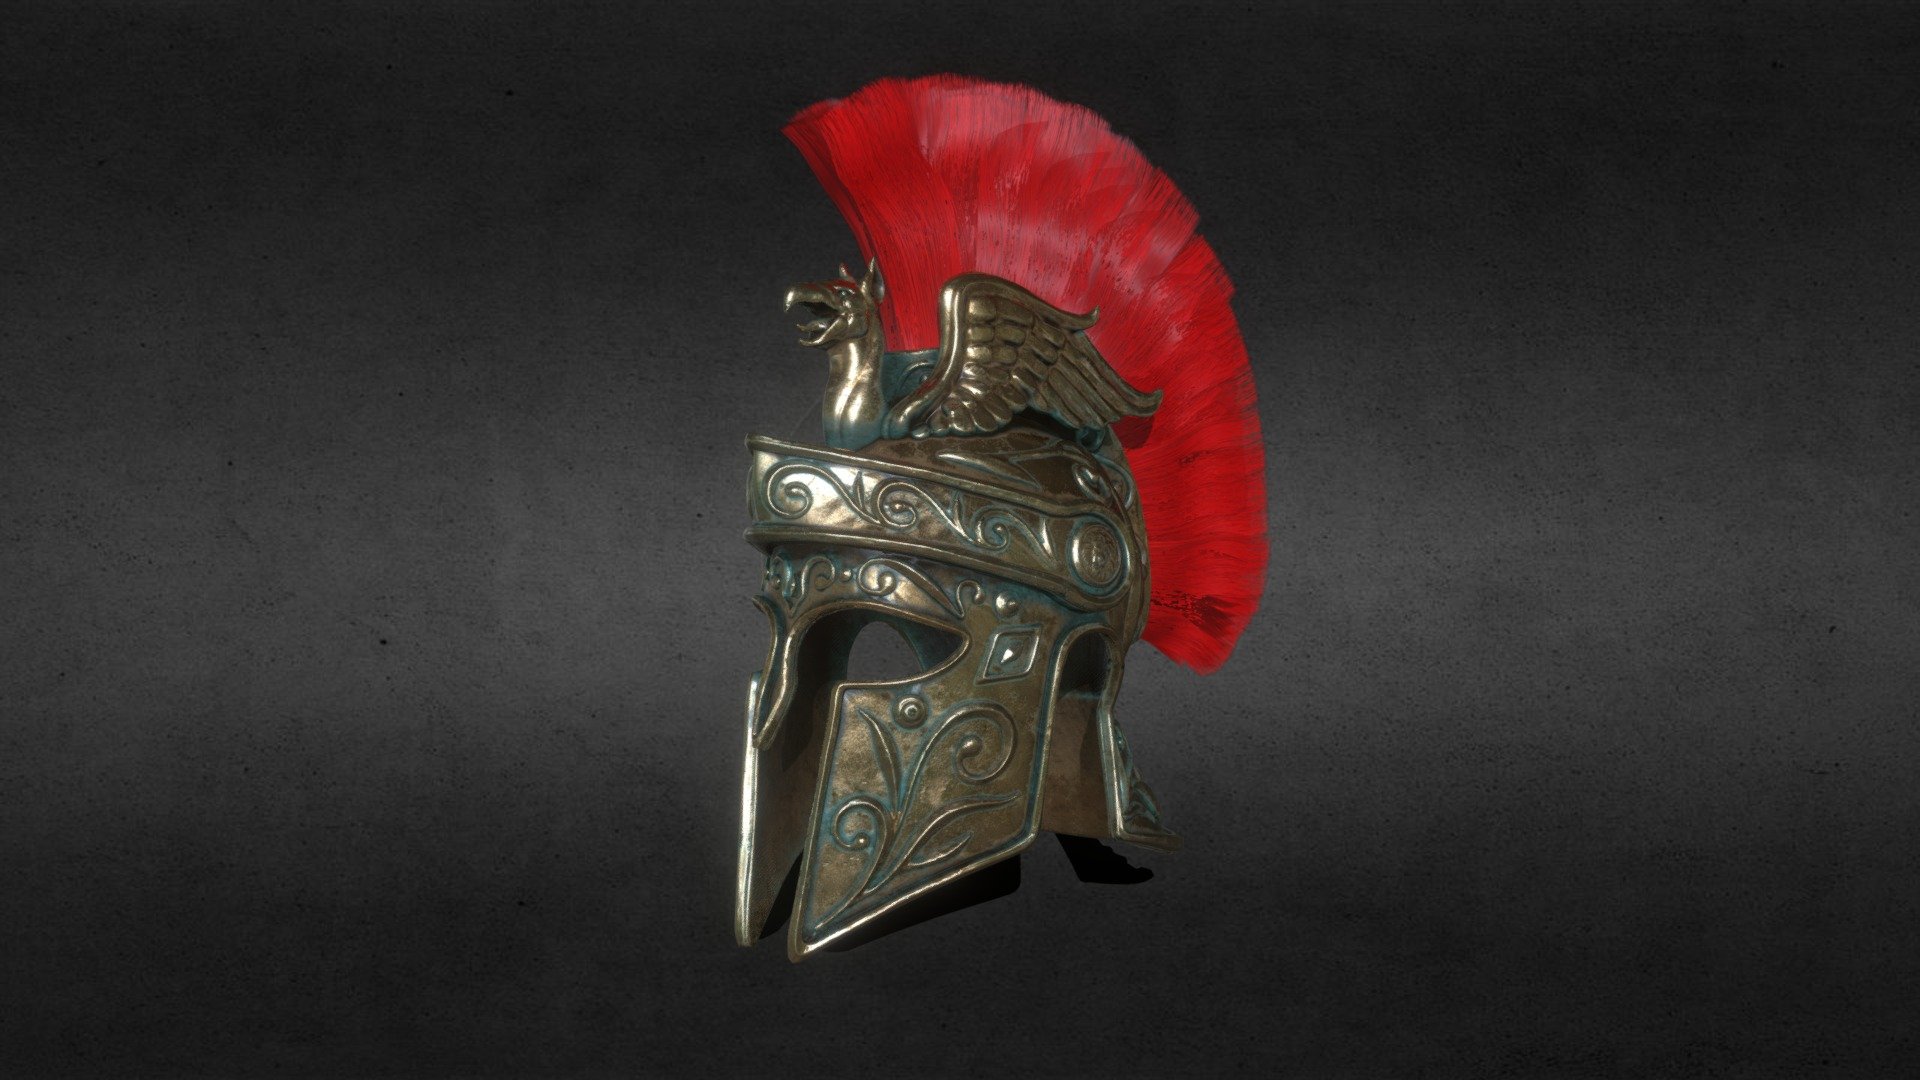 This is a game ready model or props, inspired by ancient roman or spartan history and weapons 3d model